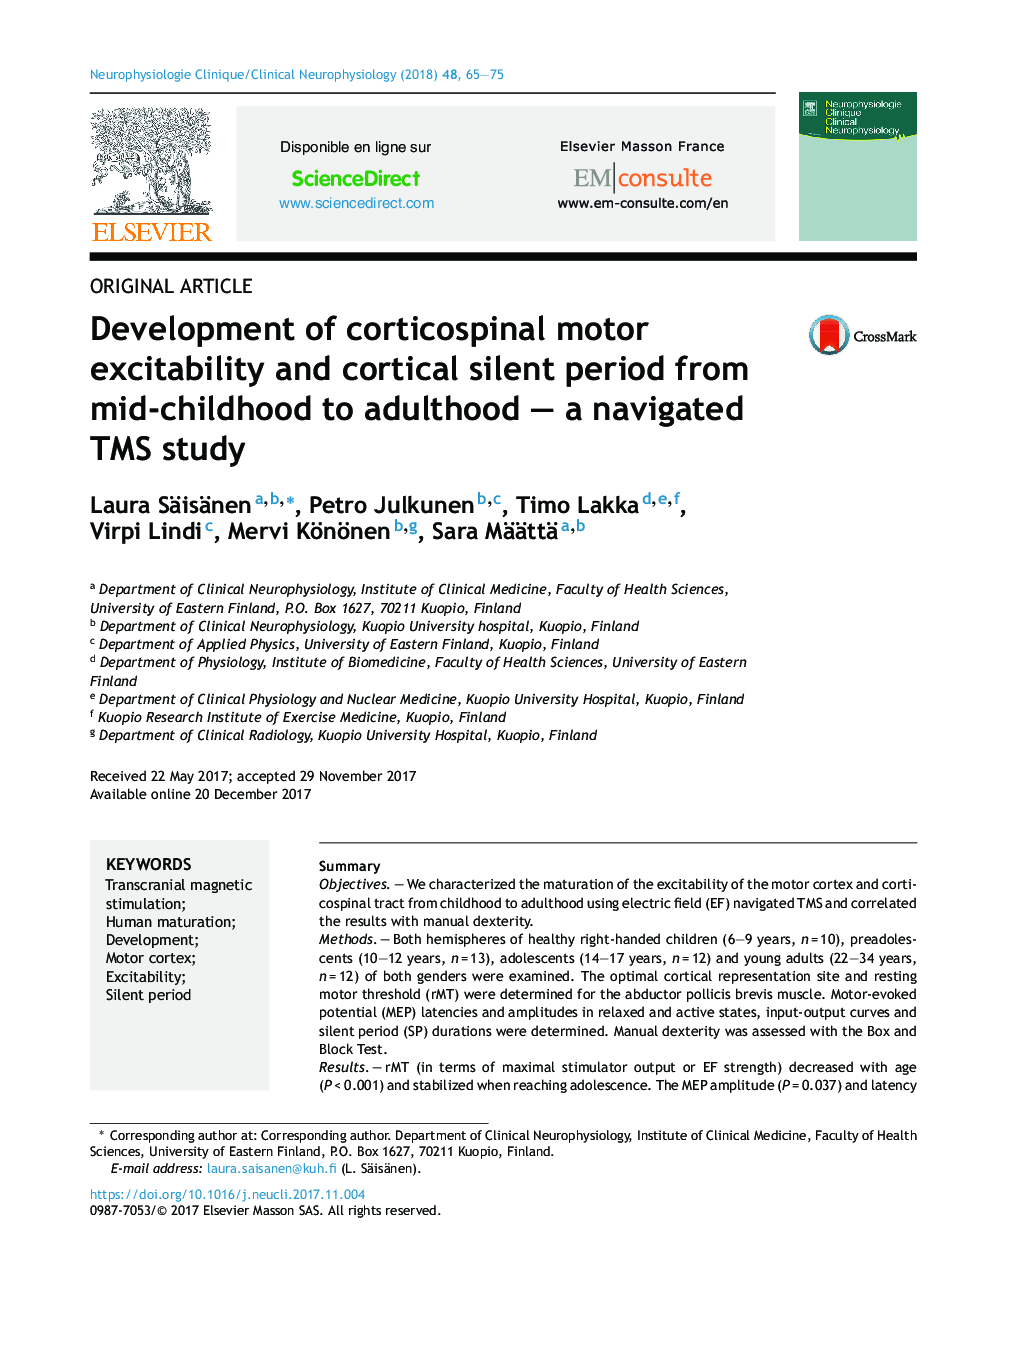 Development of corticospinal motor excitability and cortical silent period from mid-childhood to adulthood - a navigated TMS study